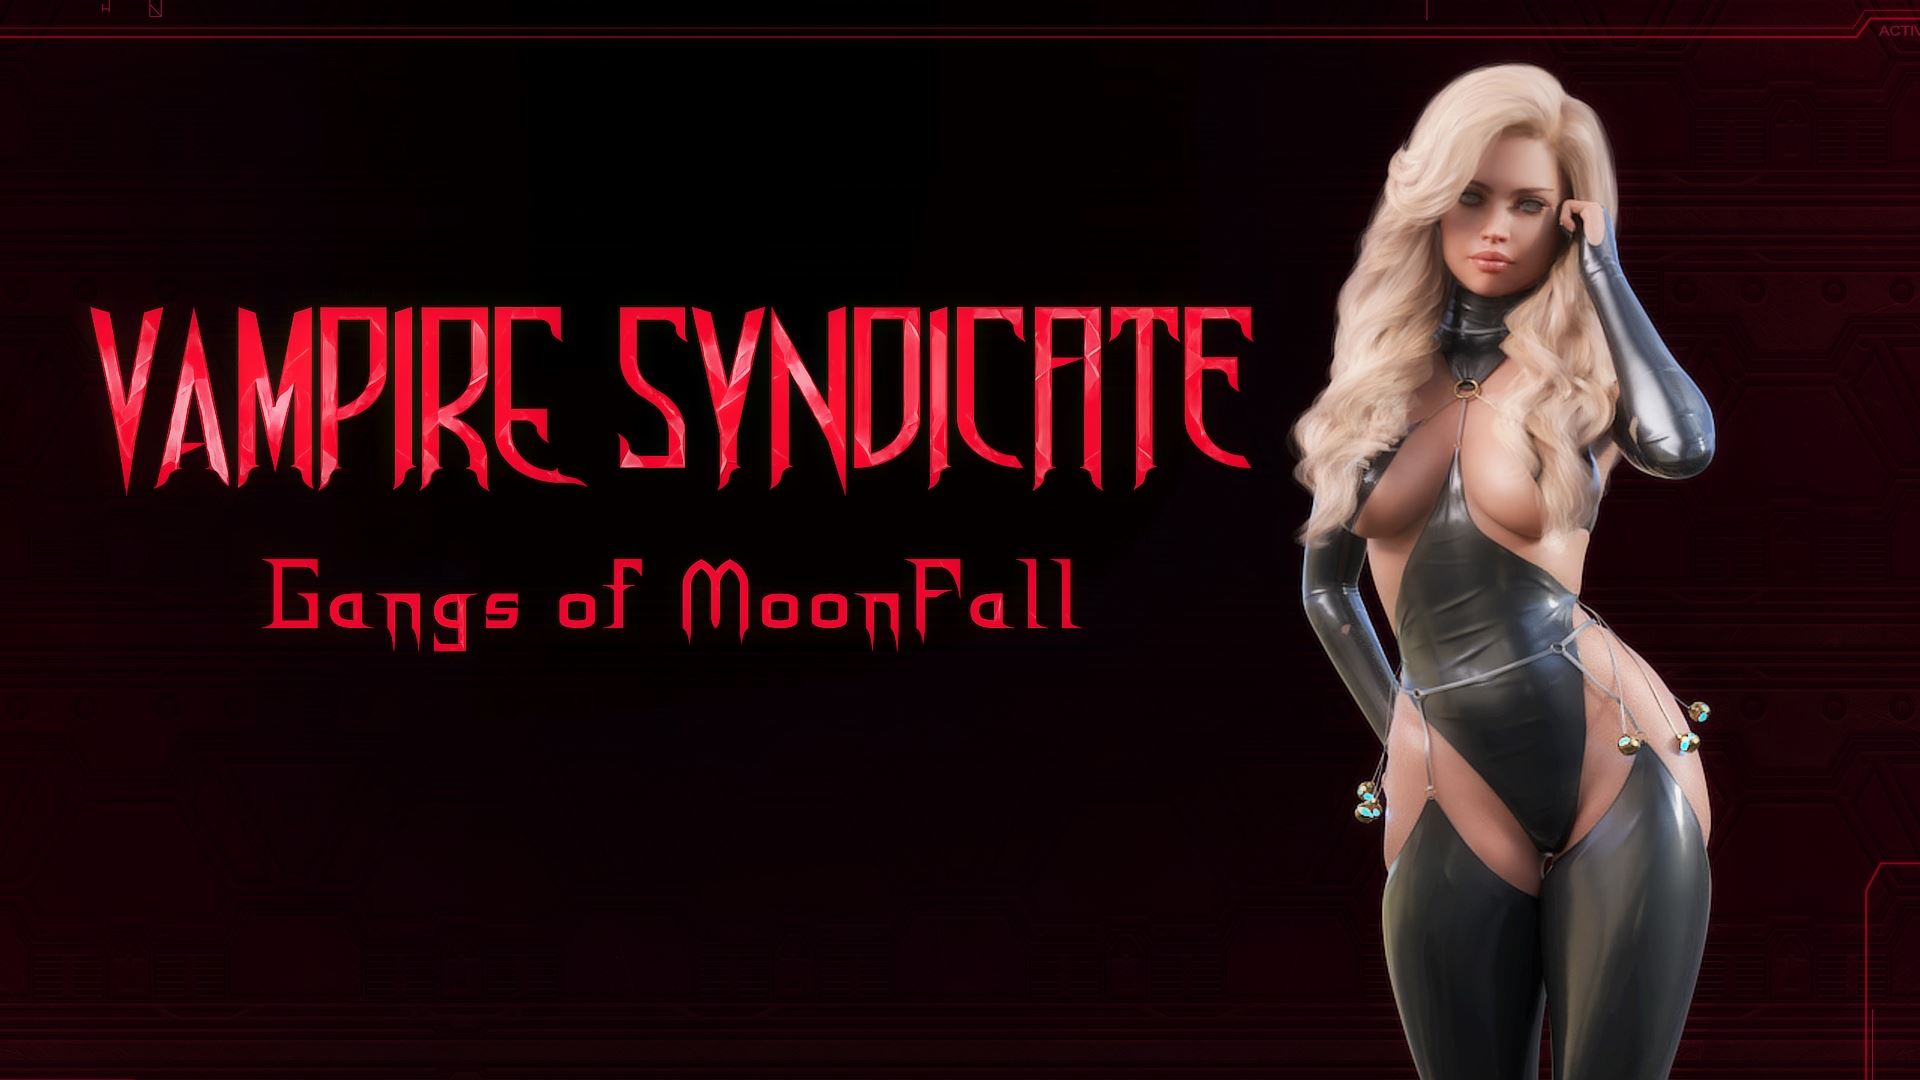 Vampire Syndicate: Gangs of MoonFall porn xxx game download cover